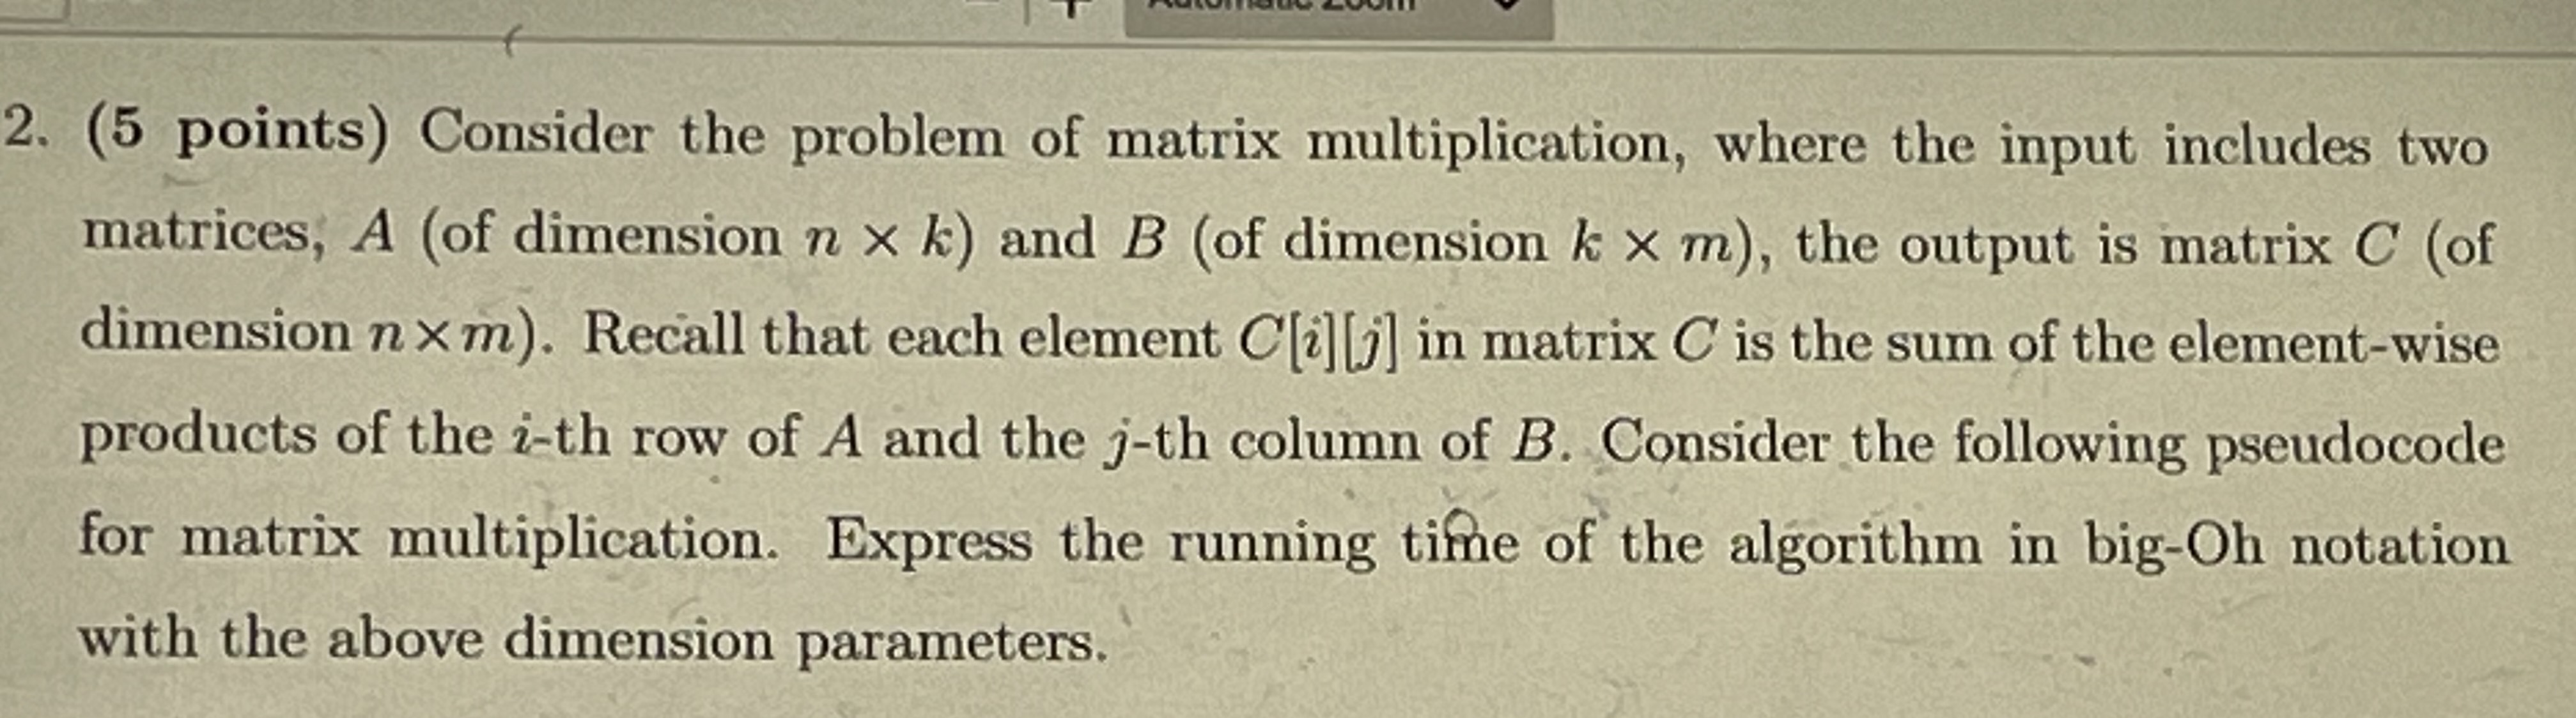 2. (5 points) Consider the problem of matrix multiplication, where the input includes two matrices, A (of